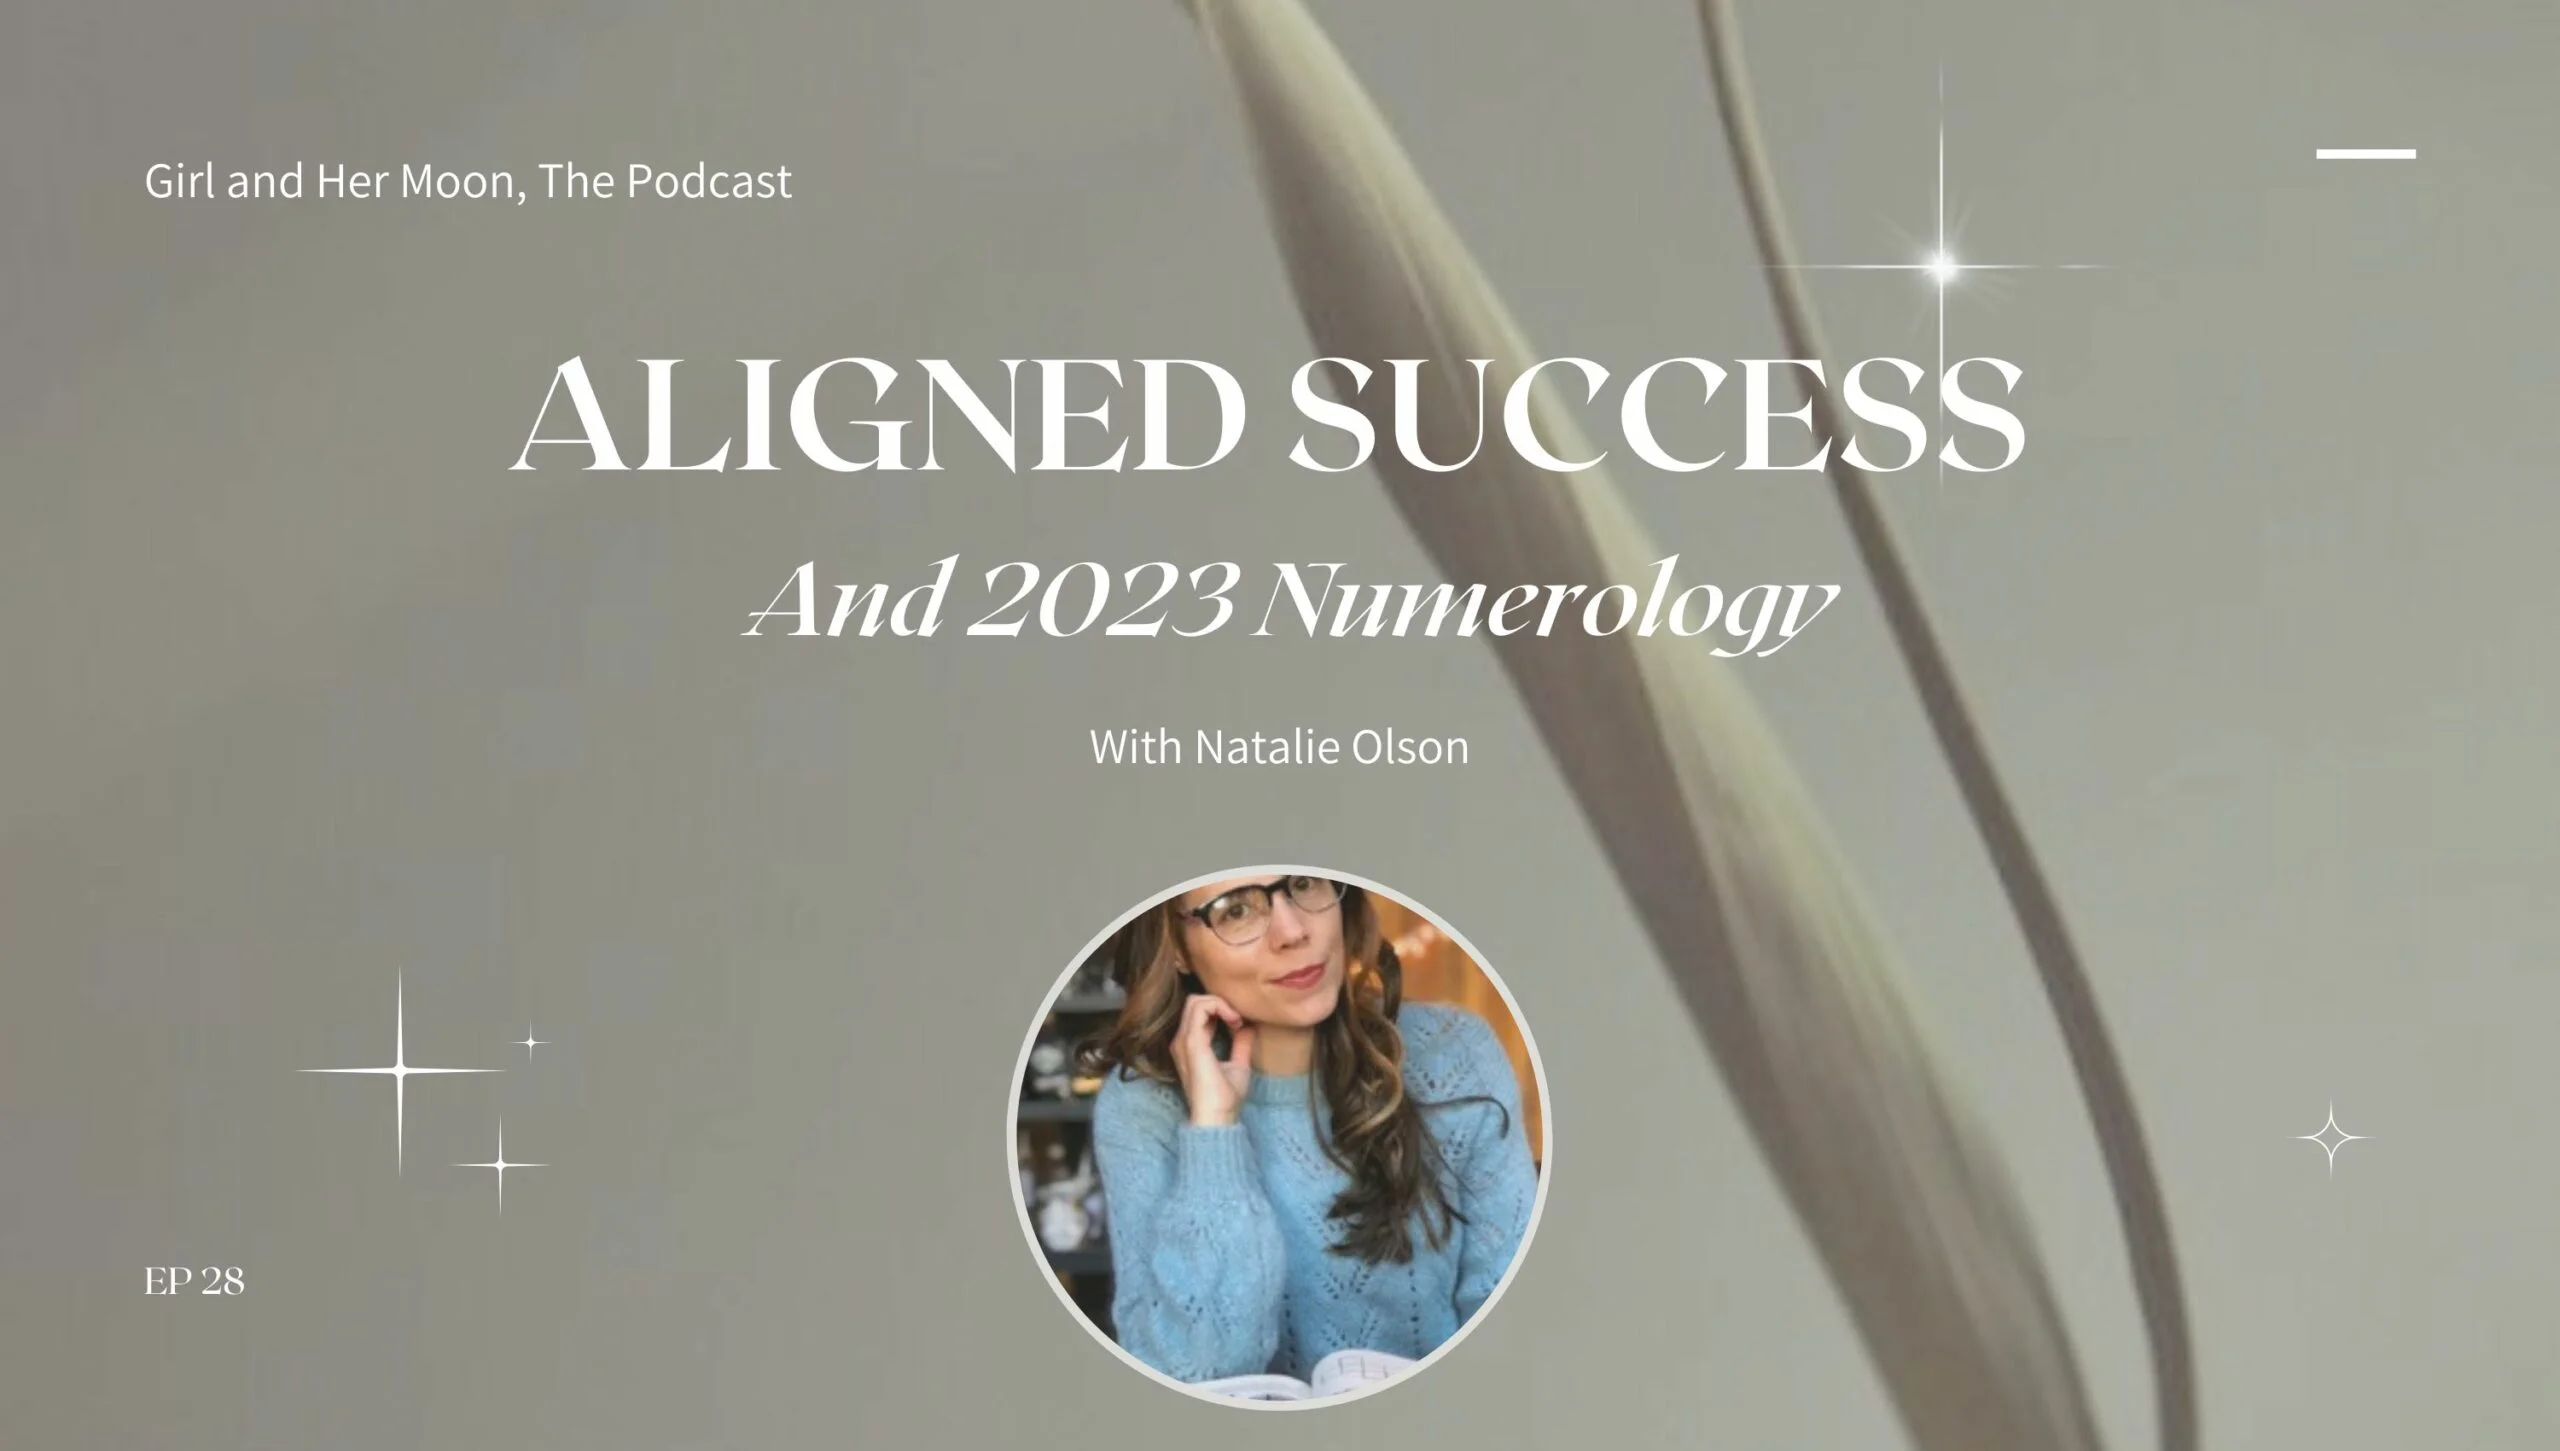 Aligned Success and 2023 Numerology with Natalie Olson